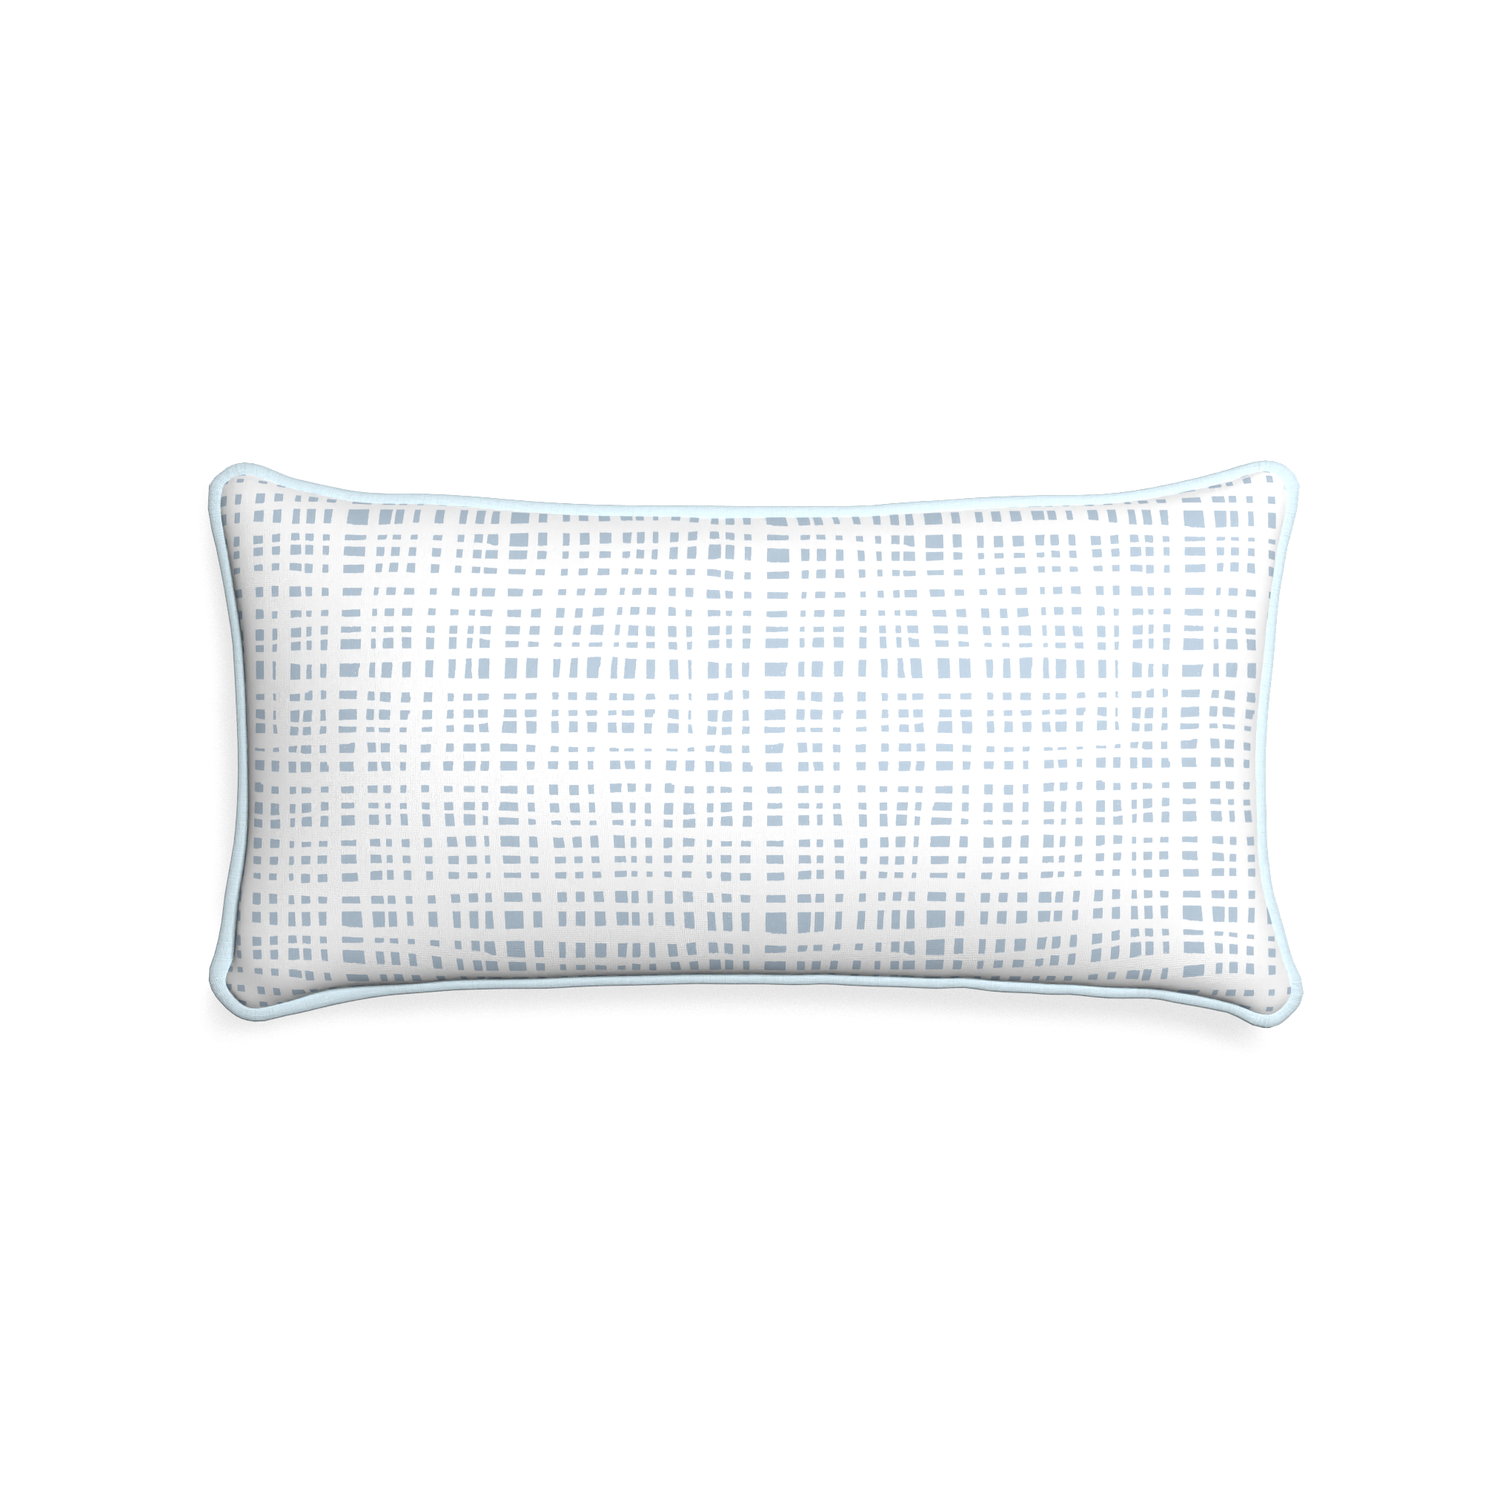 Midi-lumbar ginger custom plaid sky bluepillow with powder piping on white background